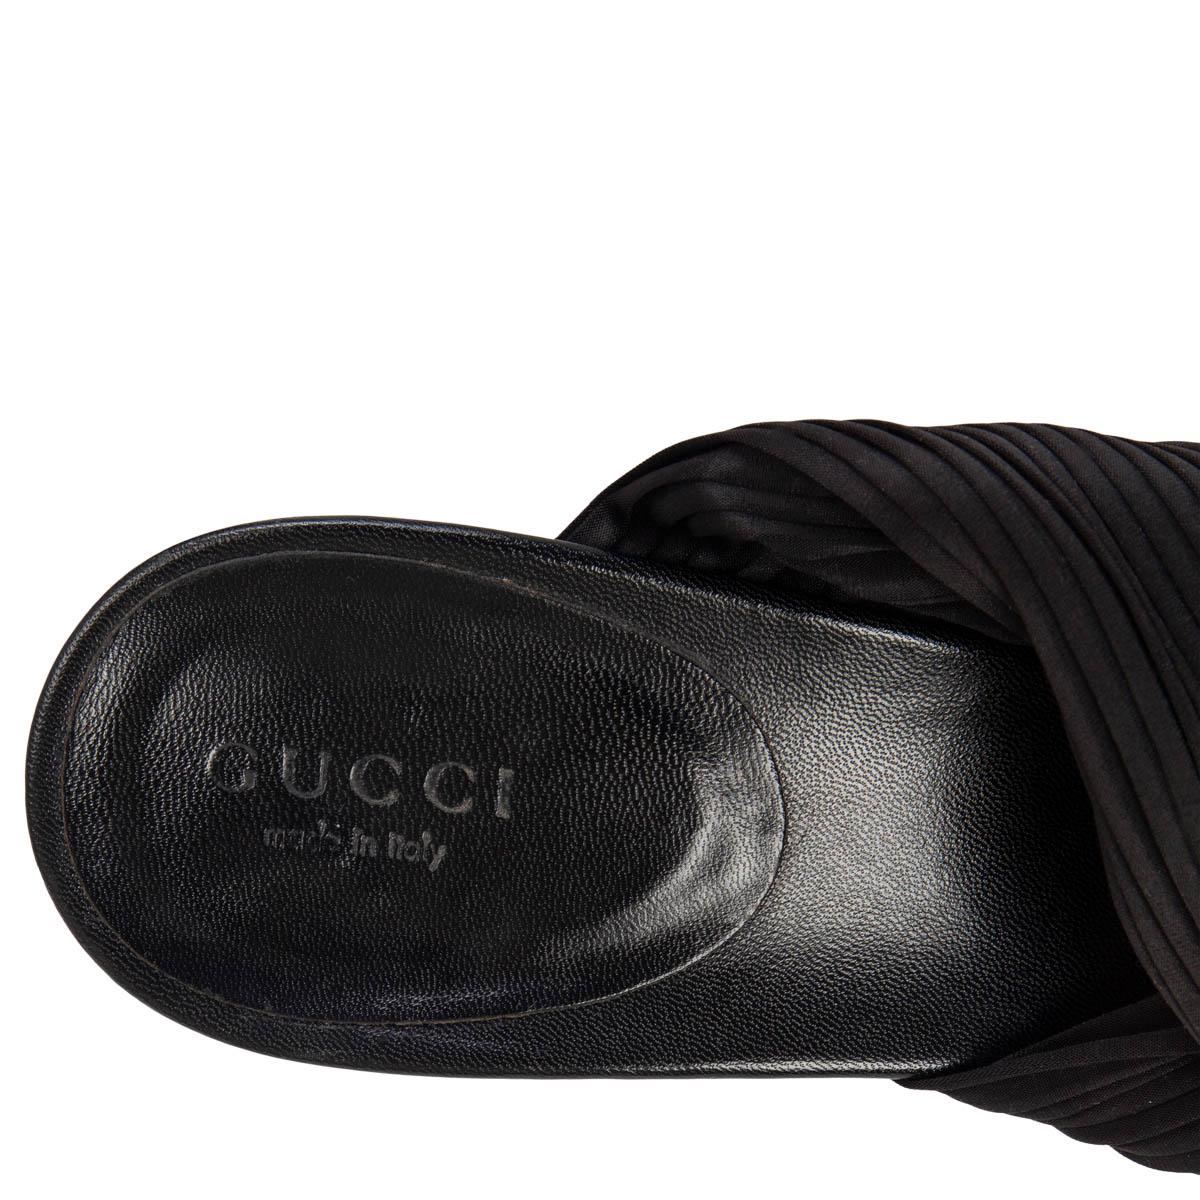 Women's GUCCI black PLEATED SATIN STRAPPY Sandals Shoes 38.5